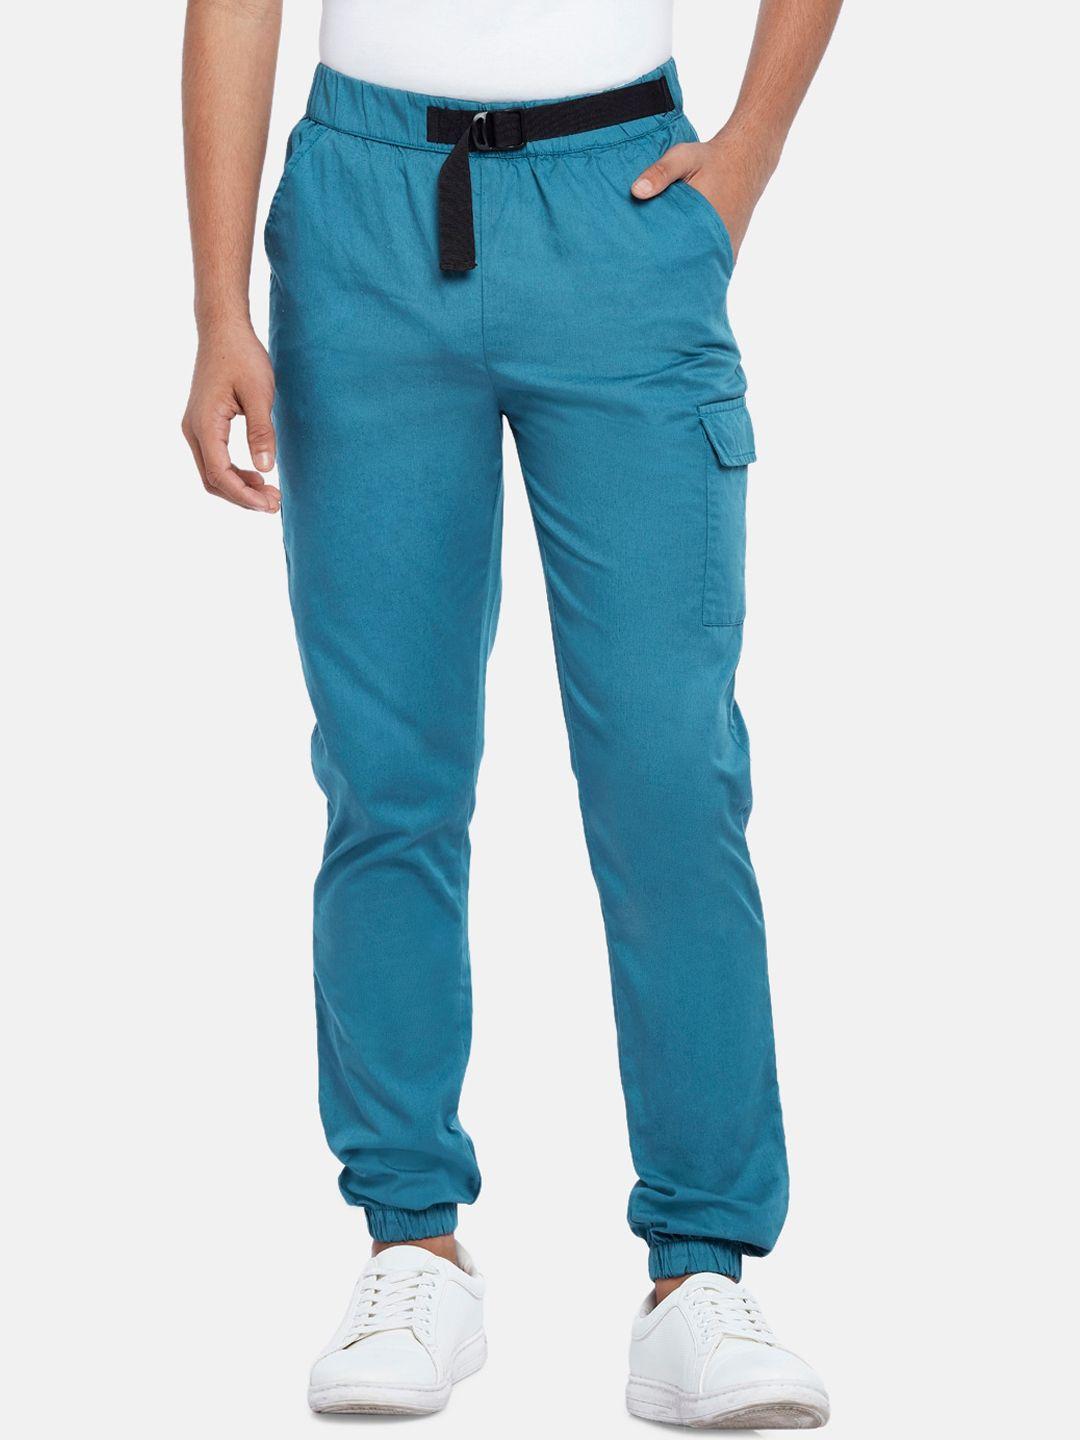 coolsters-by-pantaloons-boys-teal-joggers-trousers